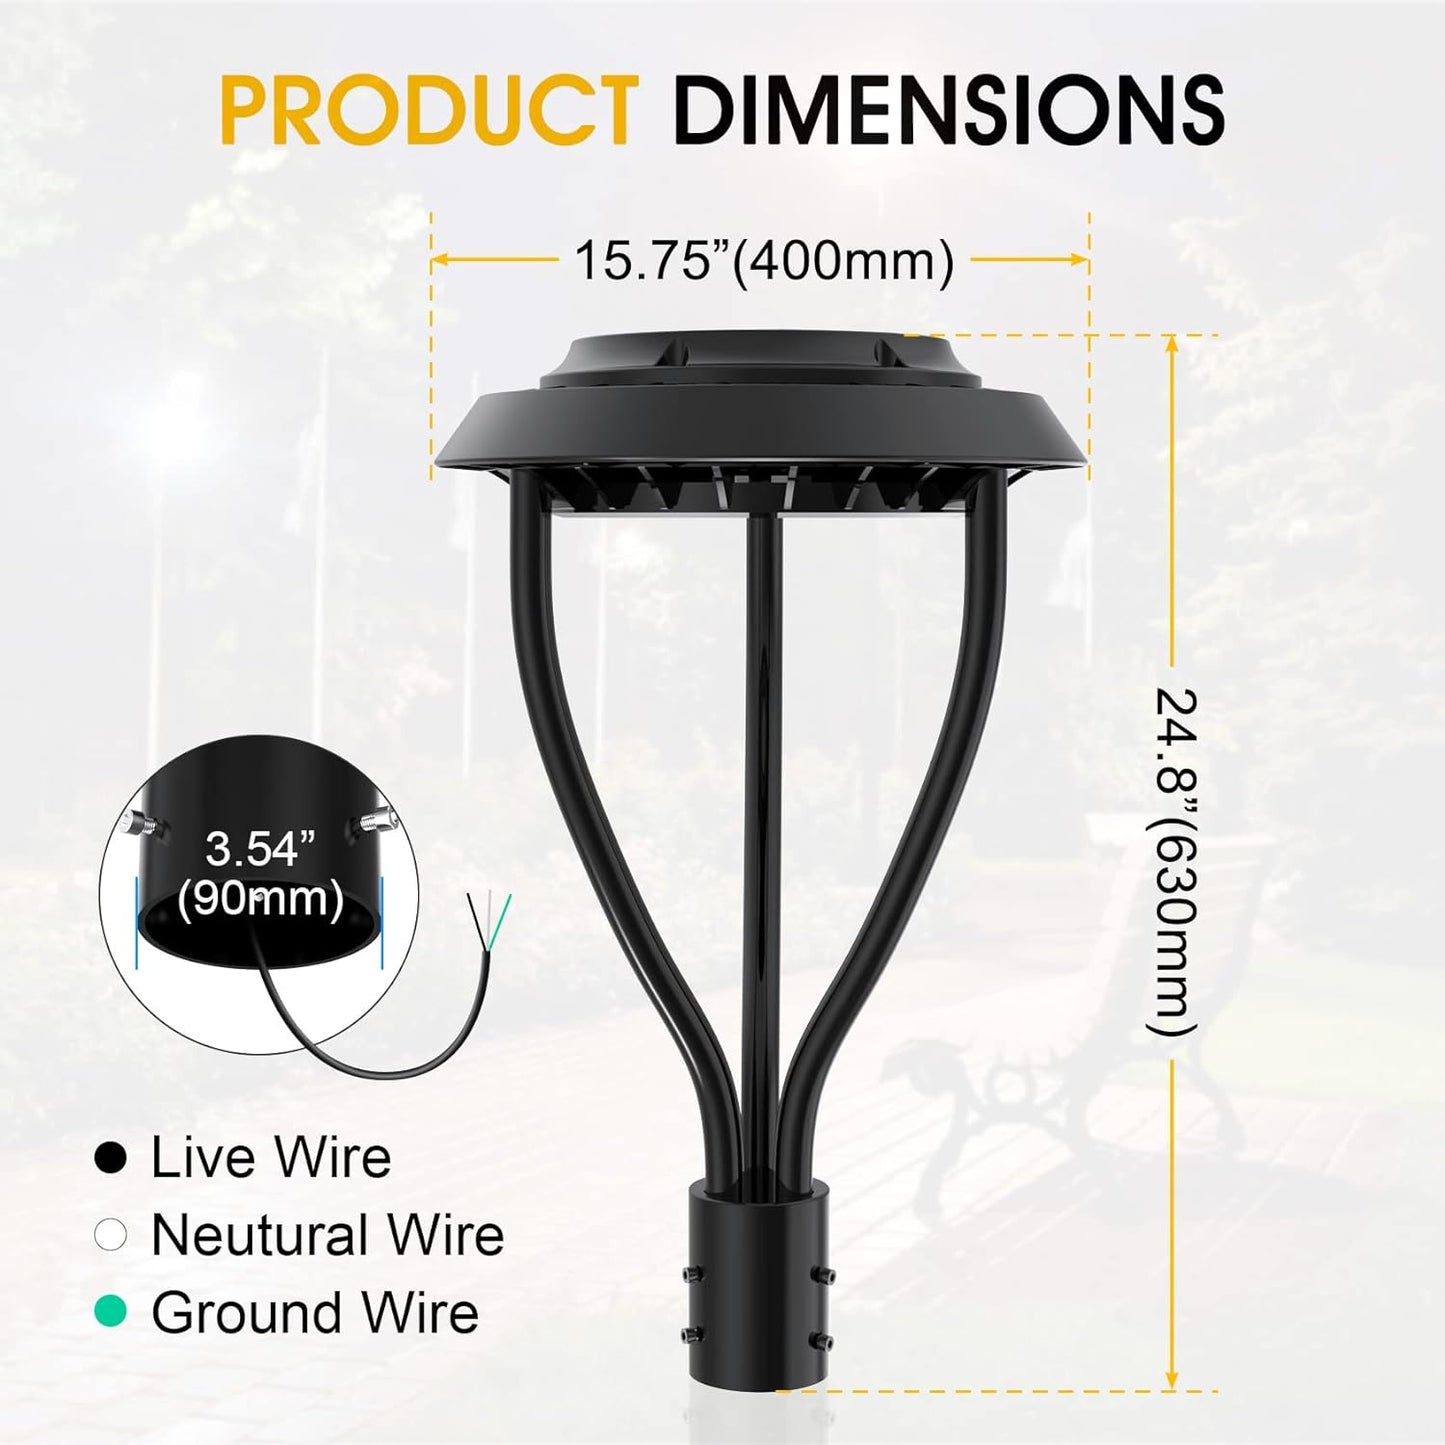 KINSNG Led Post Top Light with Dusk to Dawn Photocell, LED Circular Area Light 100W 14,000Lm 5000K Daylight[Equivalant to 400W] Outdoor Post Pole Light IP65 for School Yard Garden ETL DLC Li